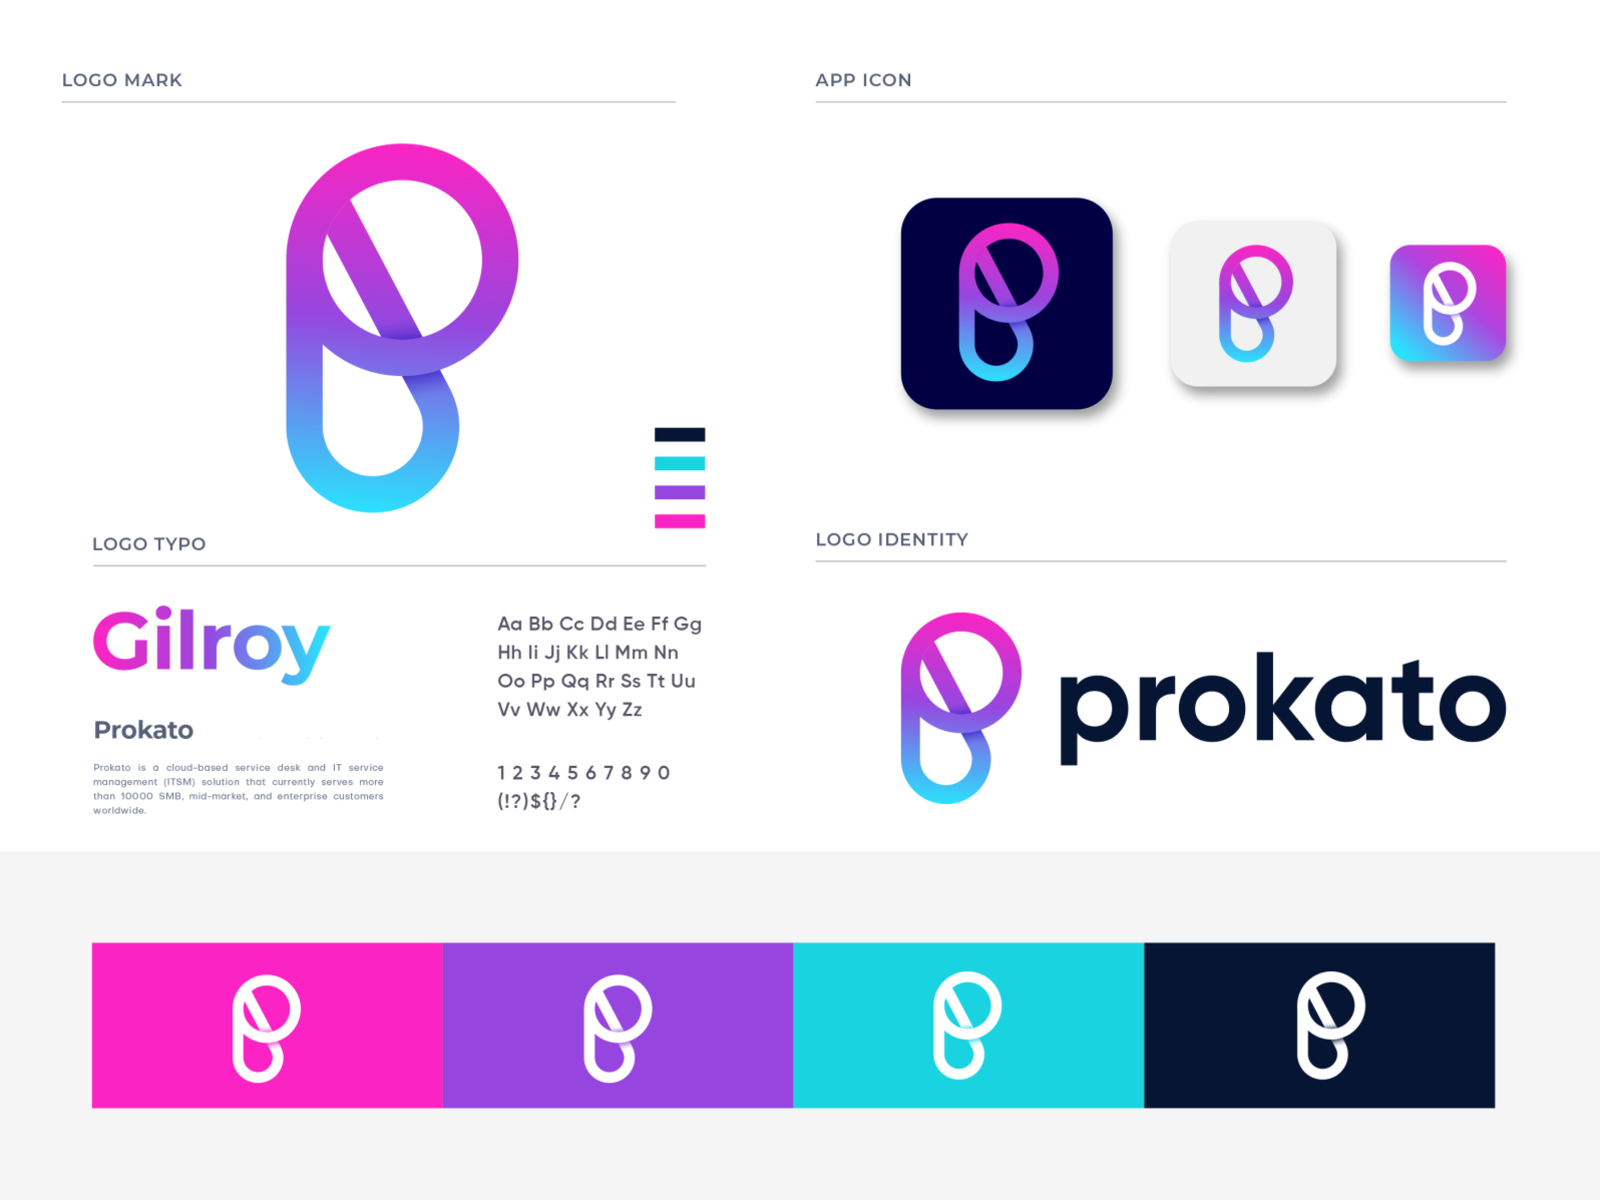 Prokato Branding For Itsm Software By Md Rasel On Dribbble